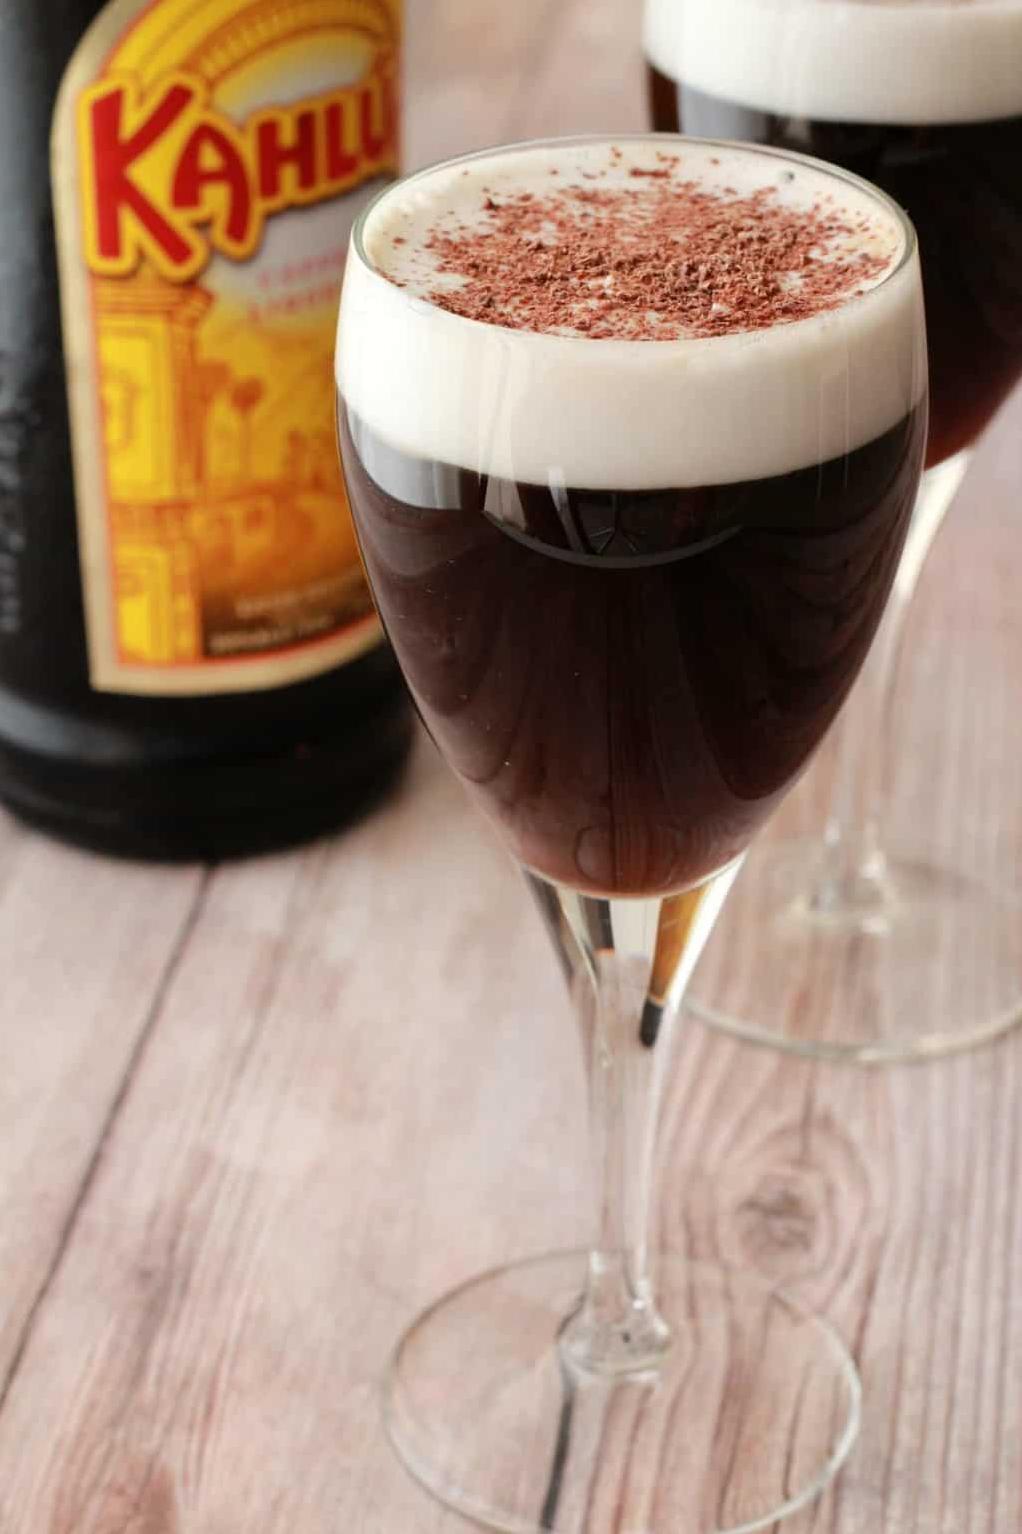  The smoothness of the coffee and the sweetness of Kahlua come together to make this perfect combination.